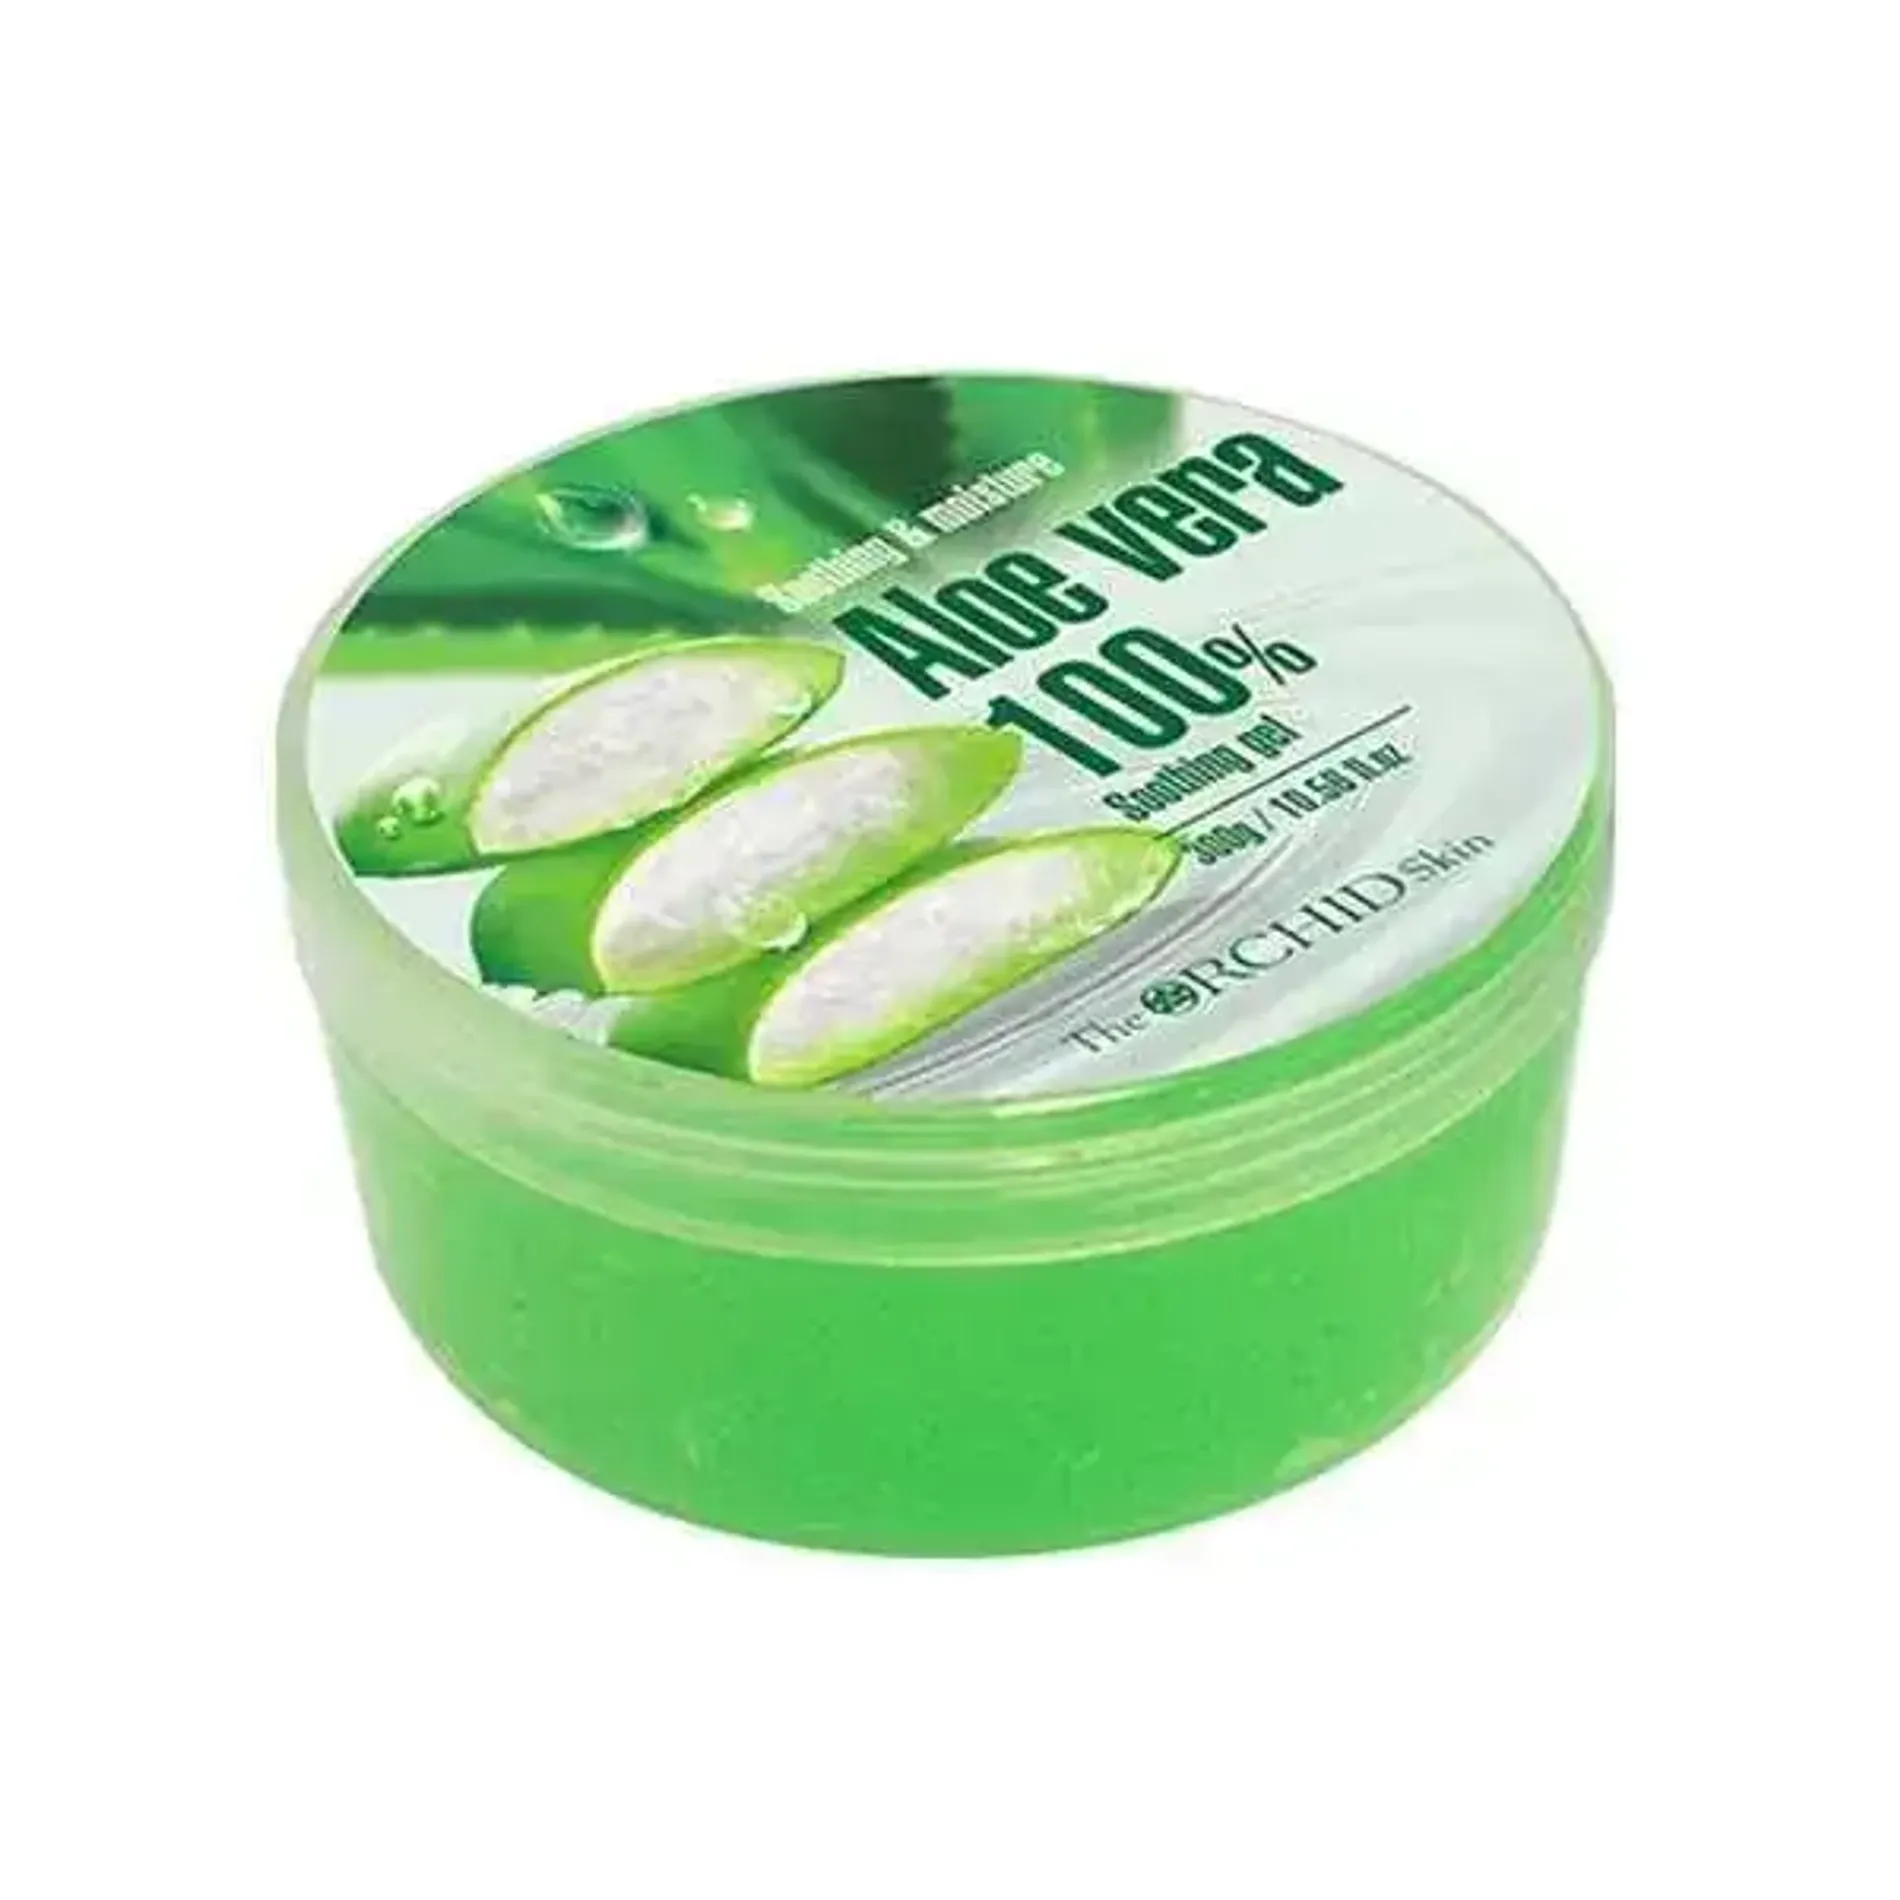 san-pham-duong-the-the-orchid-skin-aloe-soothing-gel-2